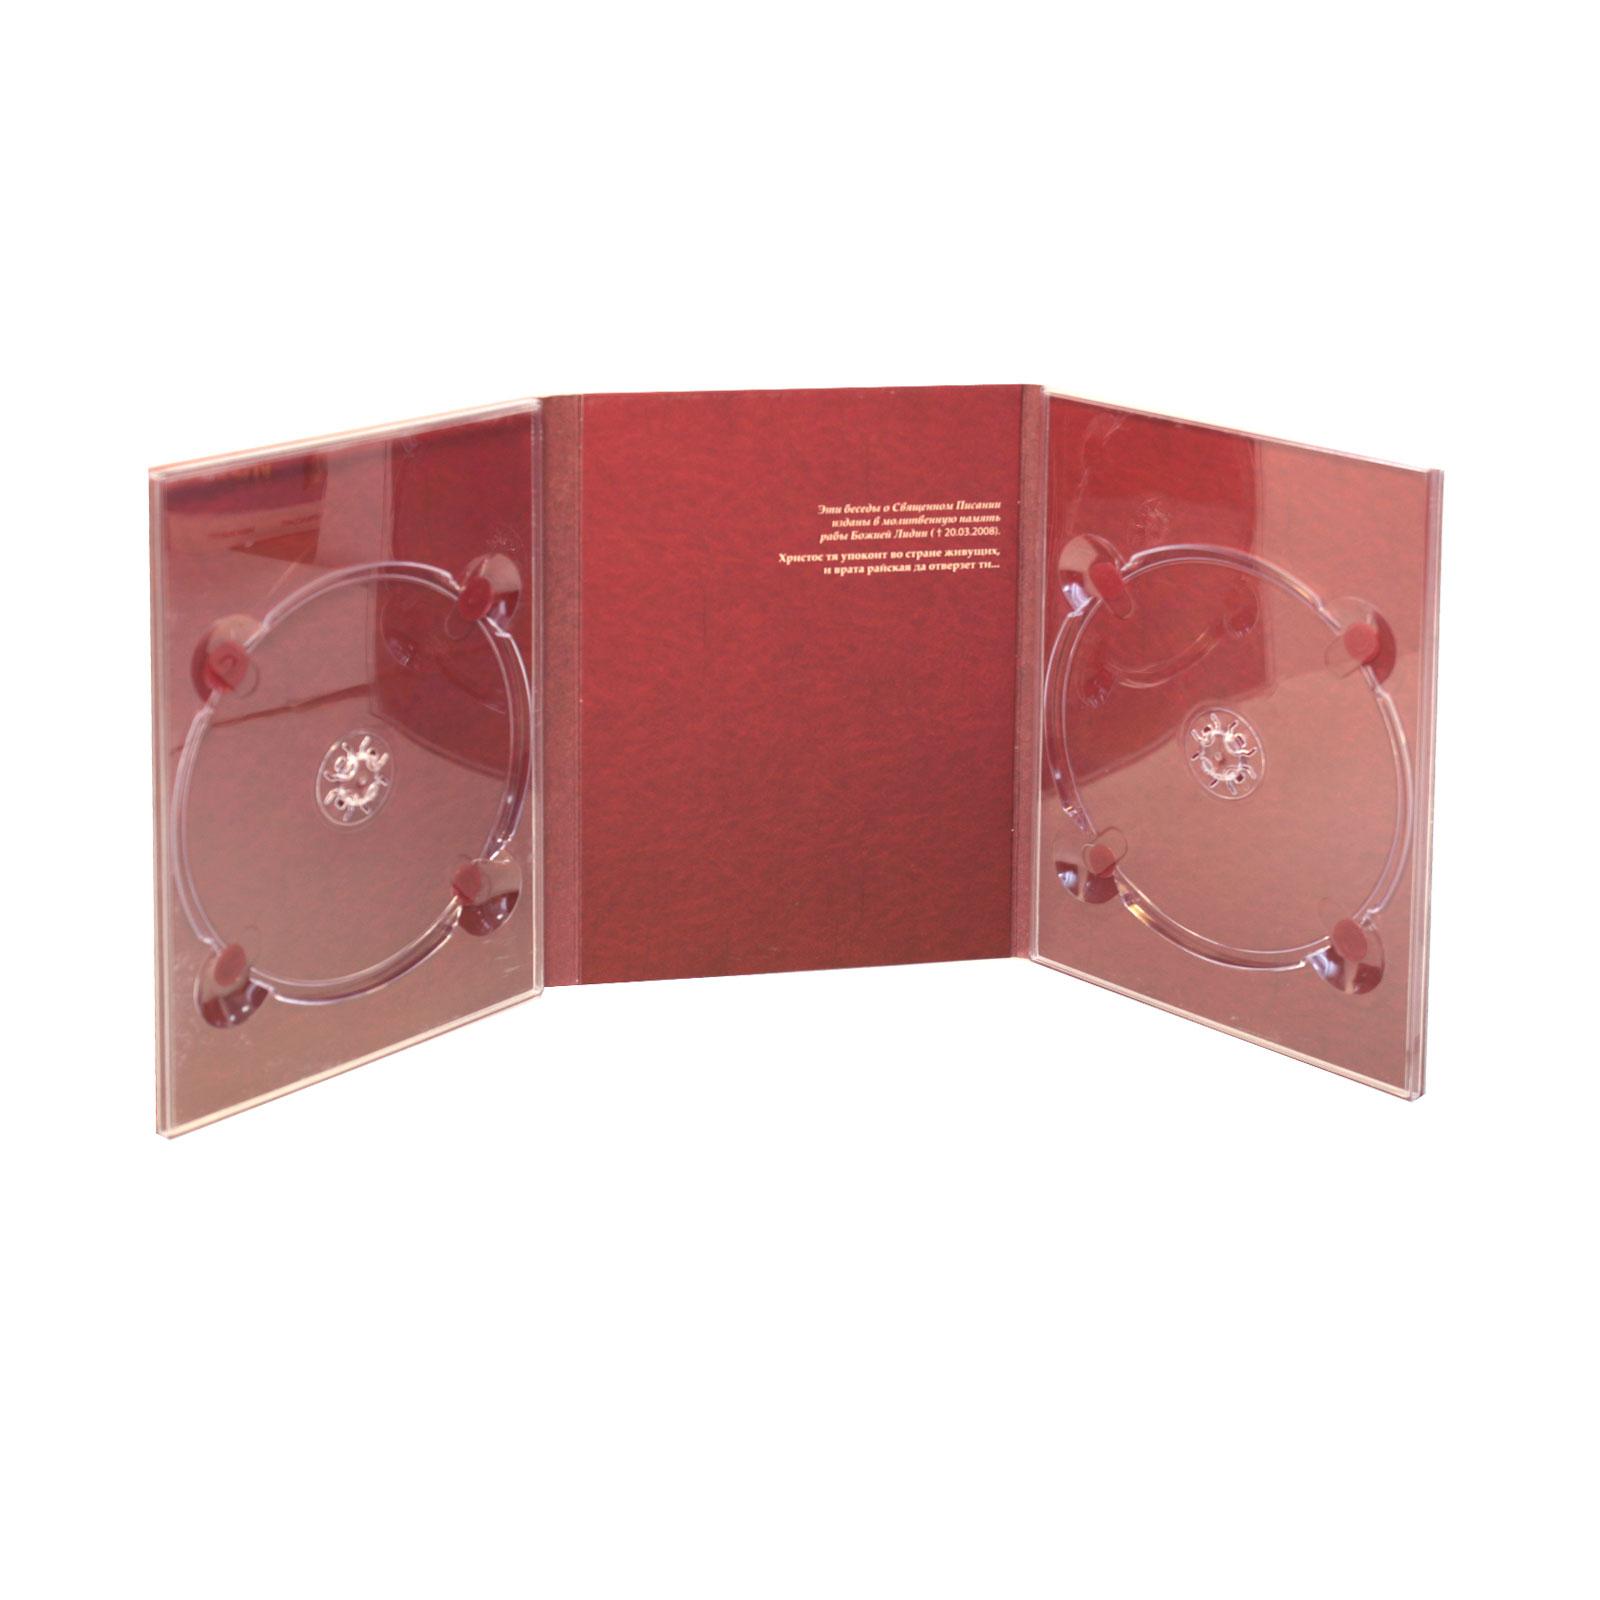 cd replication panels 2 with 20pp booklet